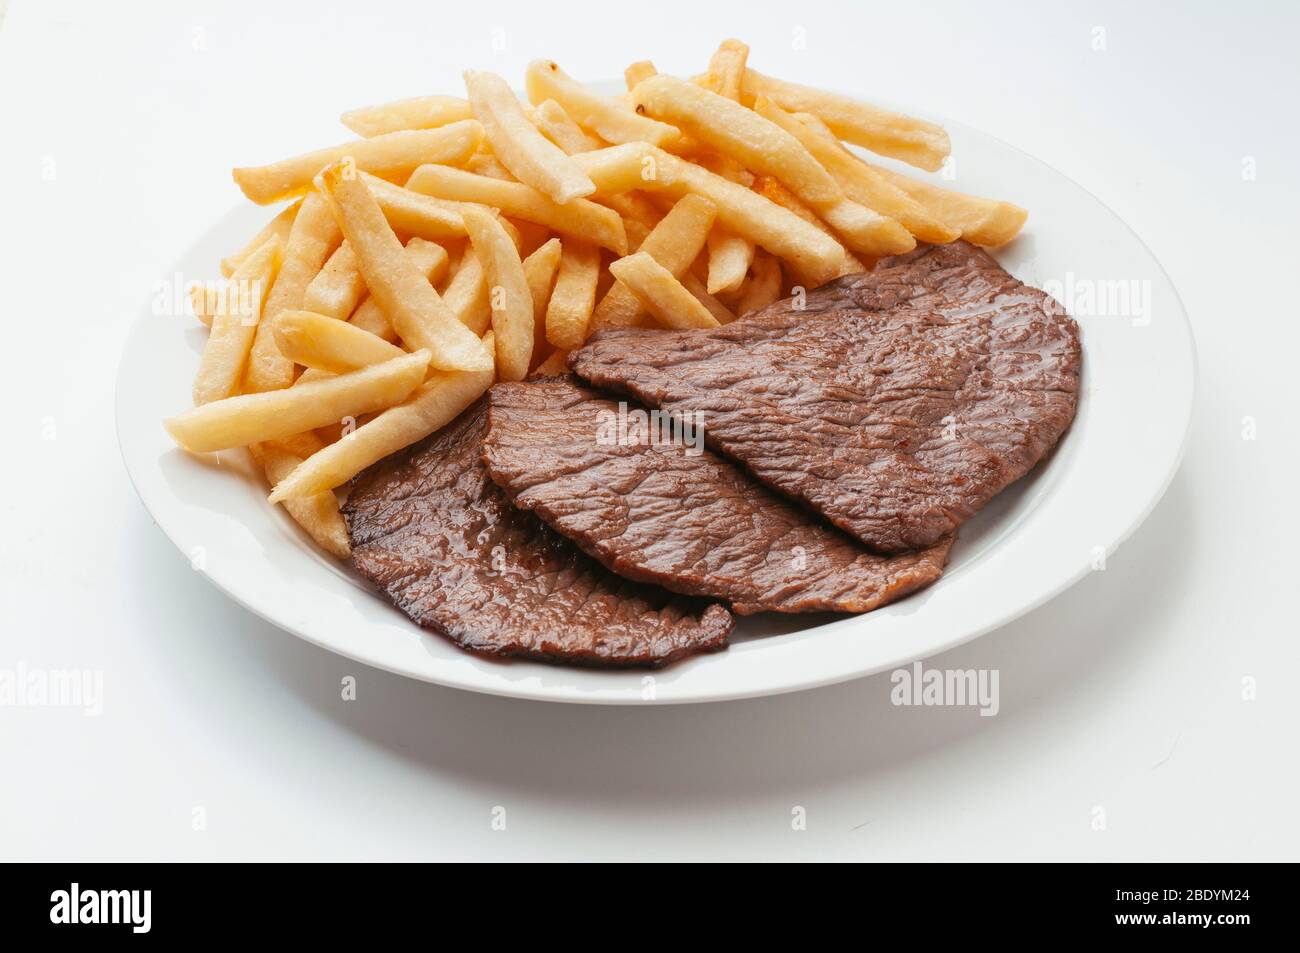 delicious grilled meat with french fries Stock Photo